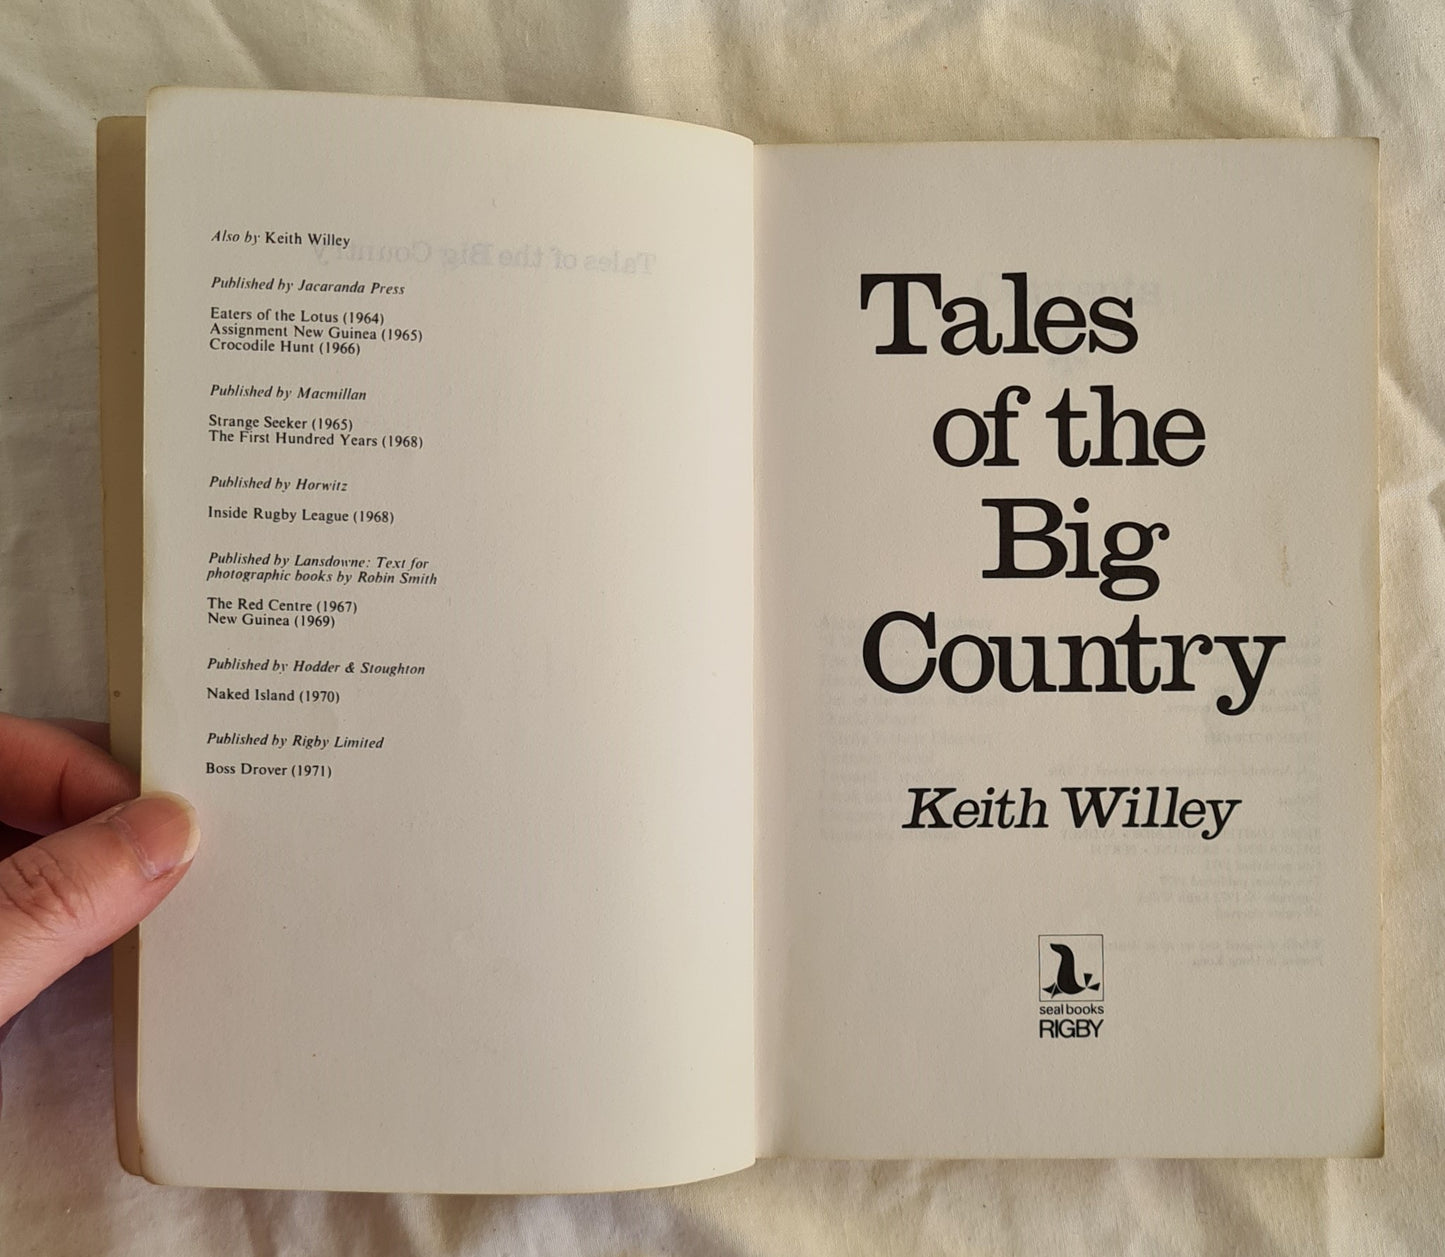 Tales of the Big Country by Keith Wiley